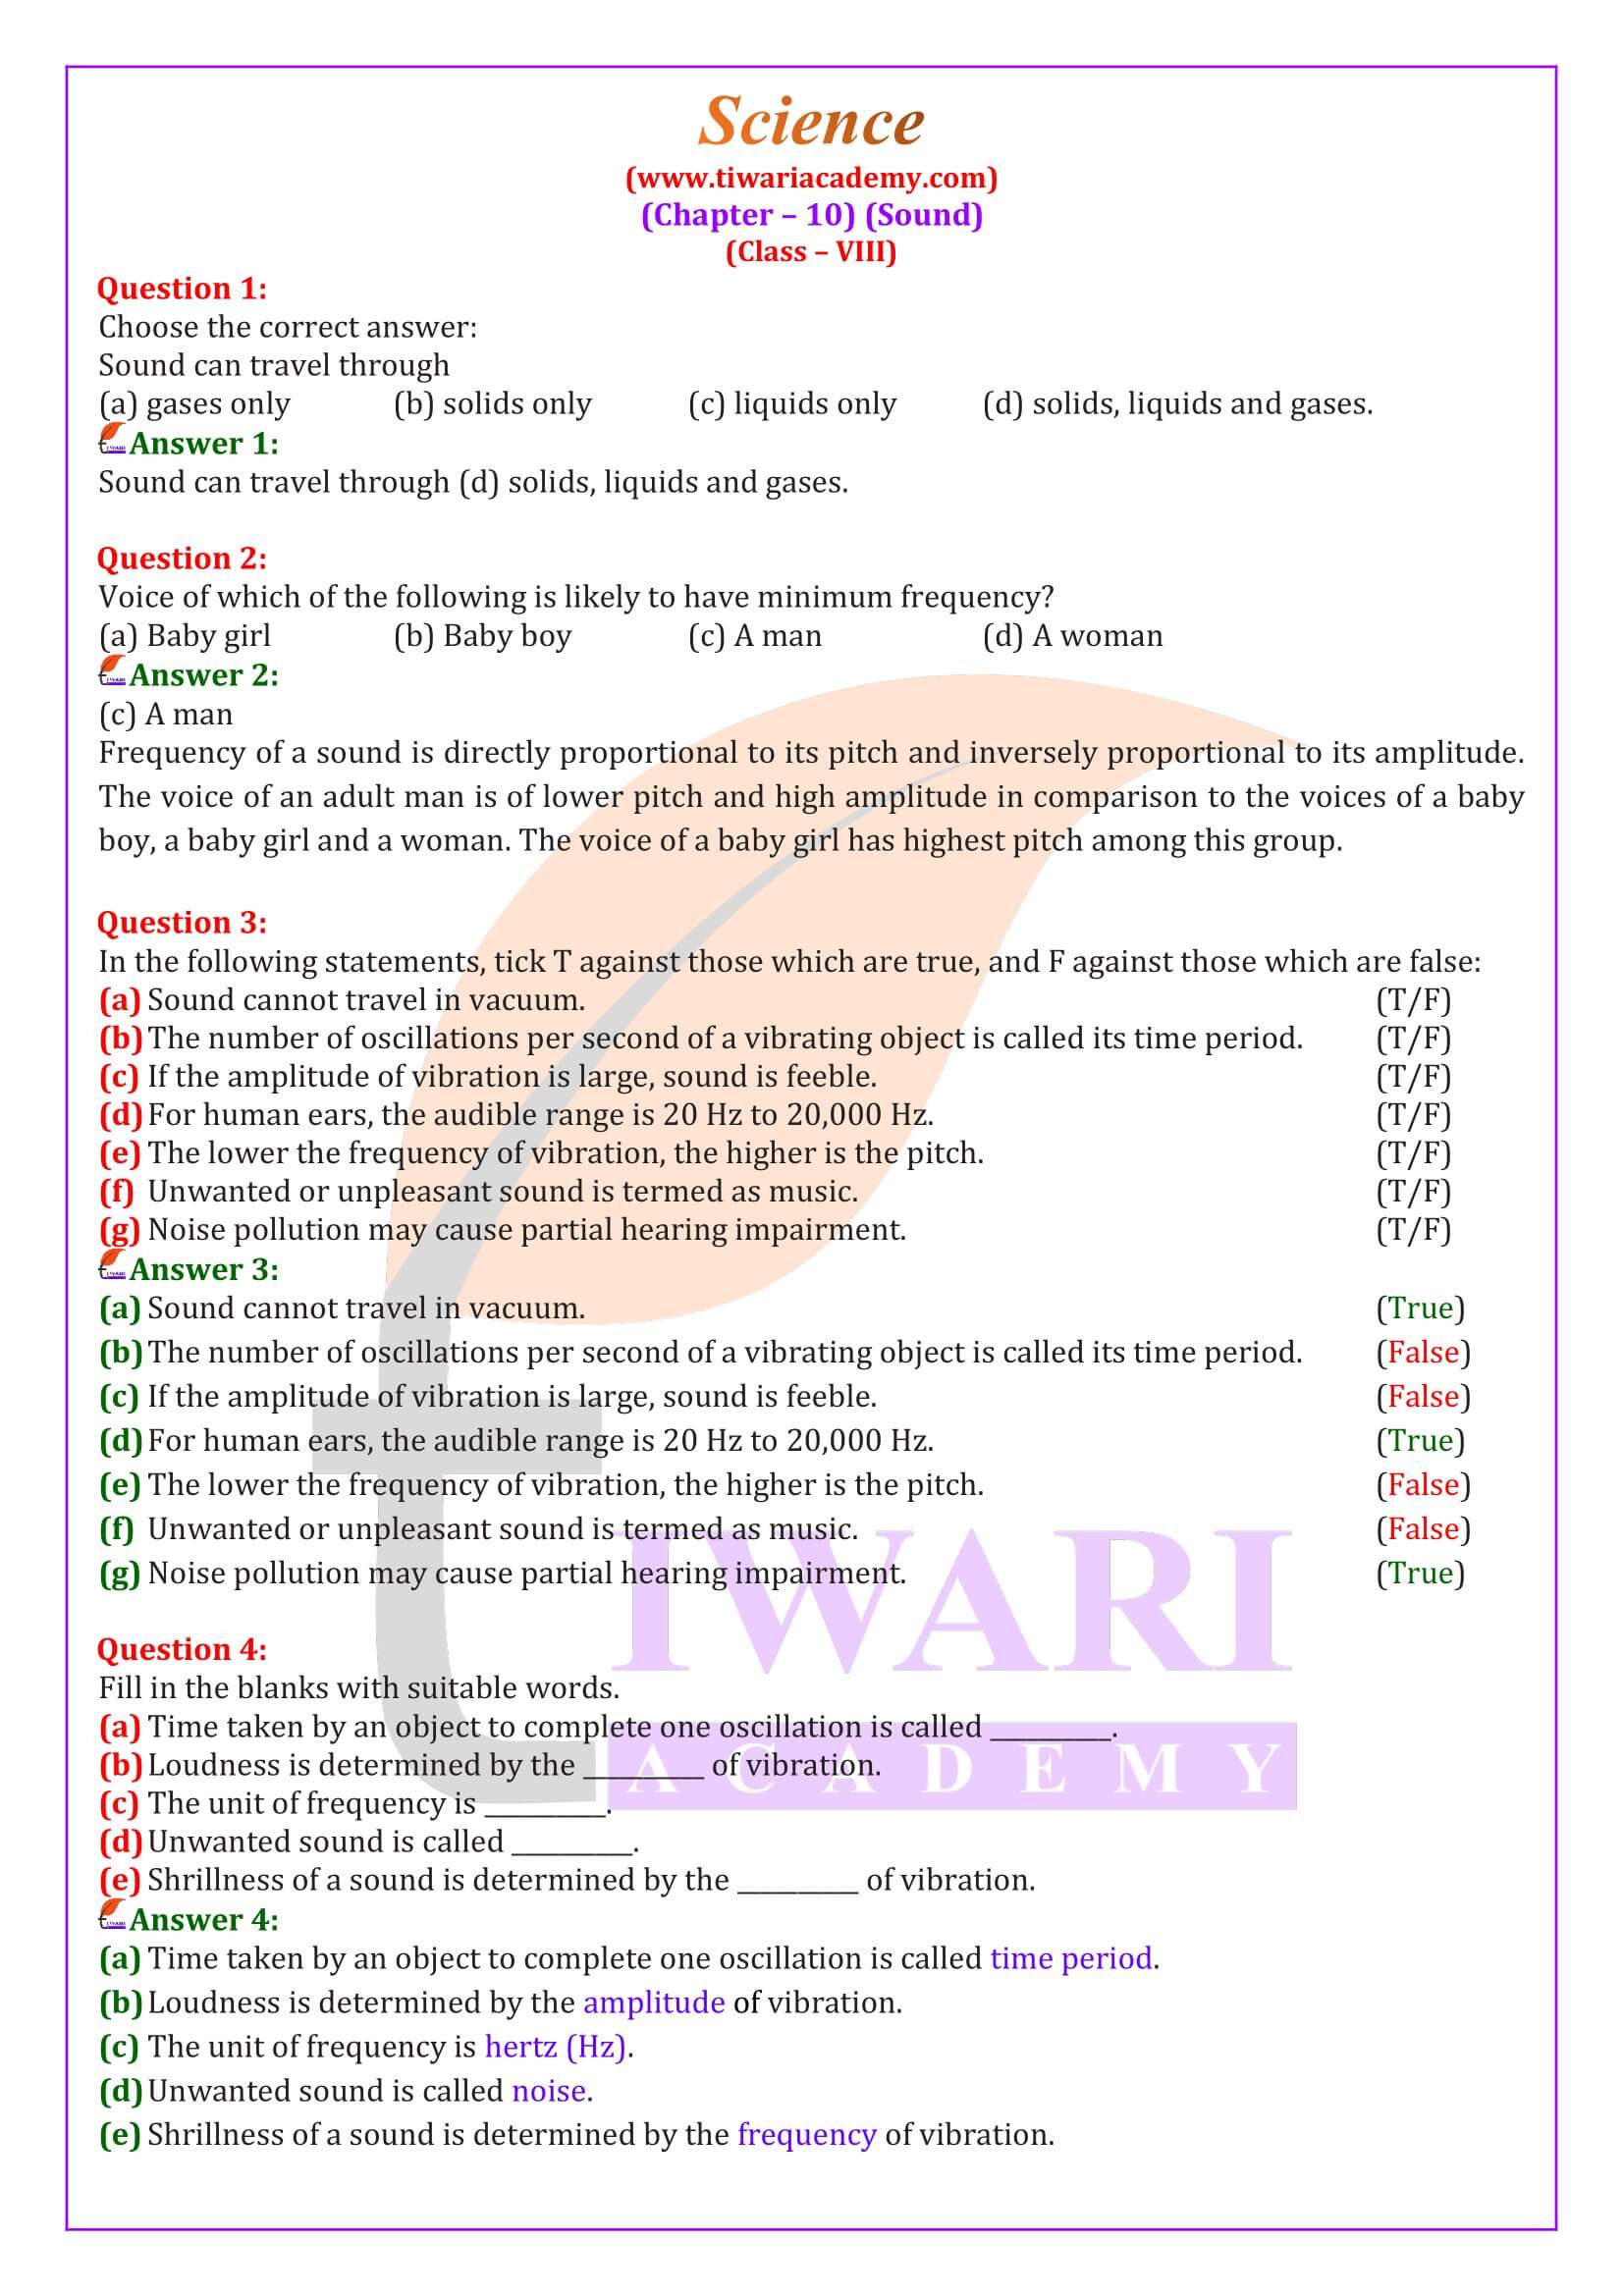 NCERT Solutions for Class 8 Science Chapter 10 in English Medium